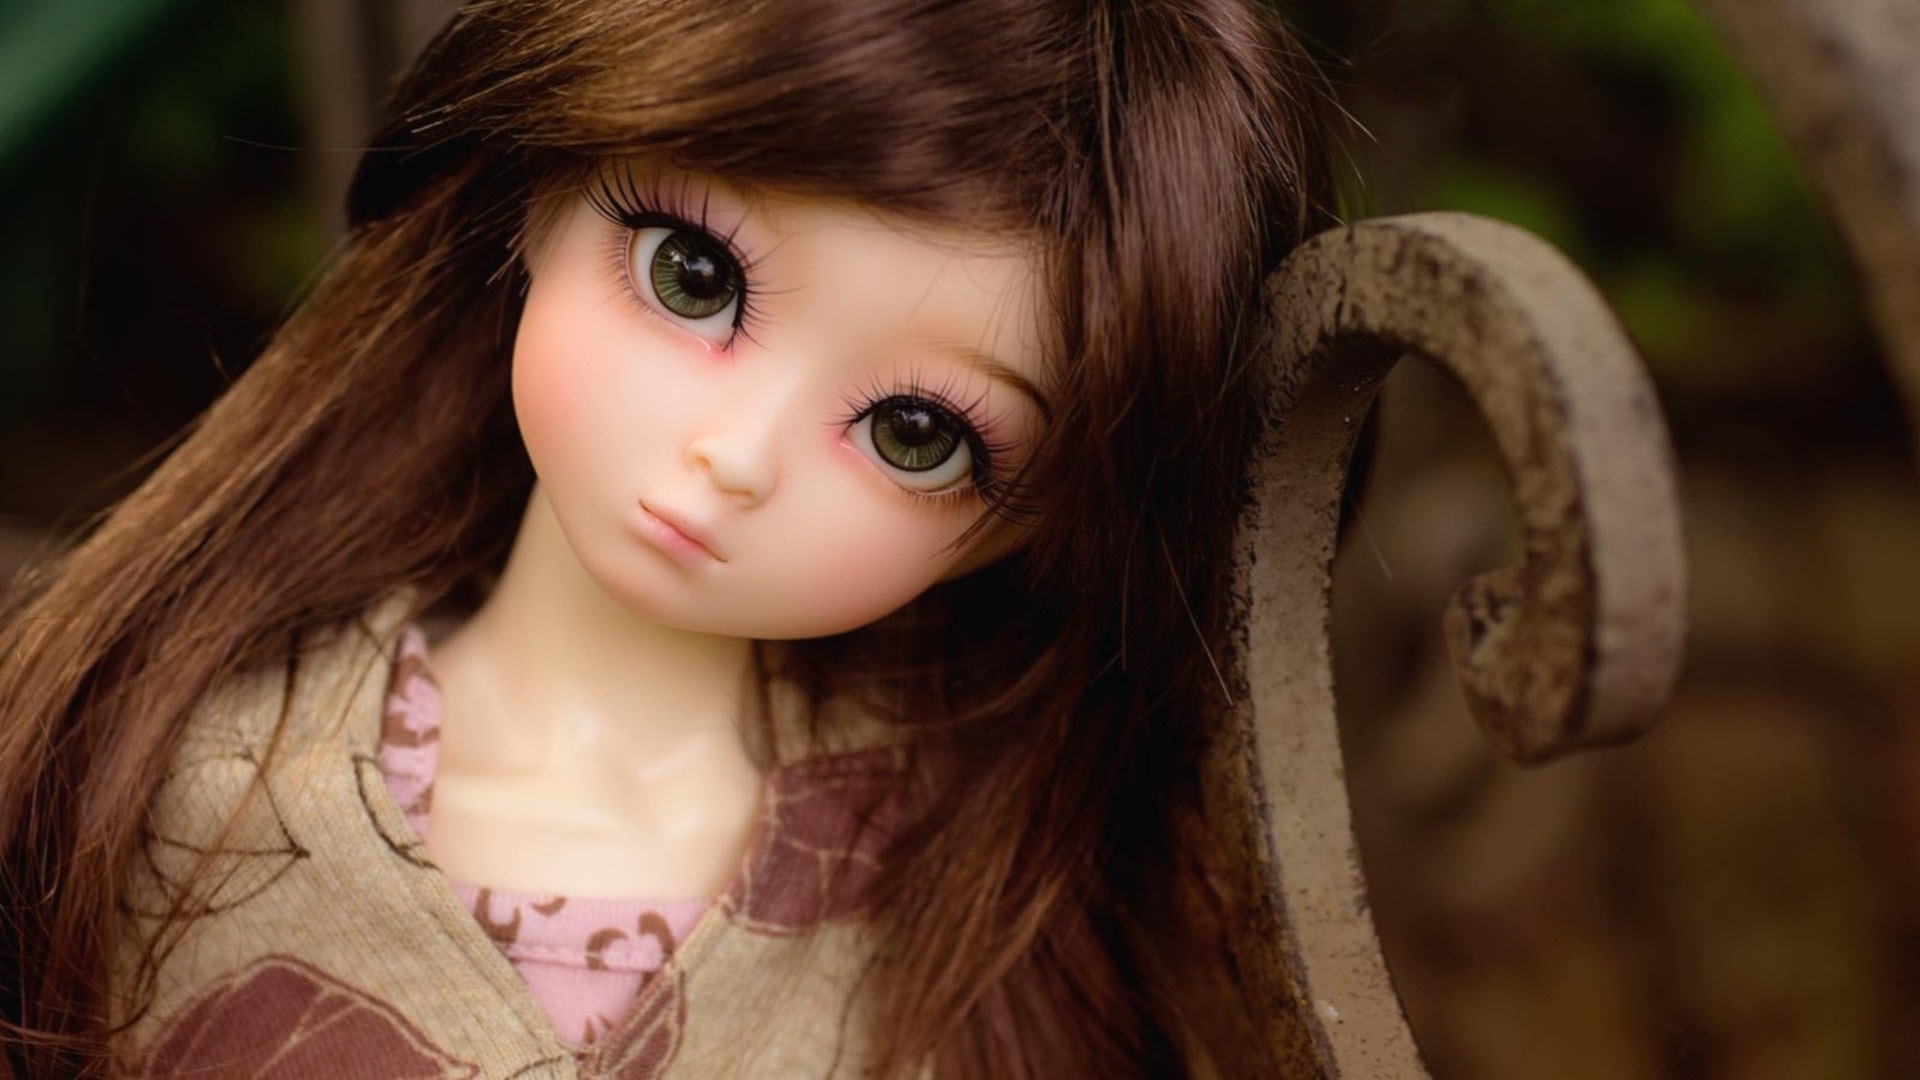 Doll Backgrounds Free Download 